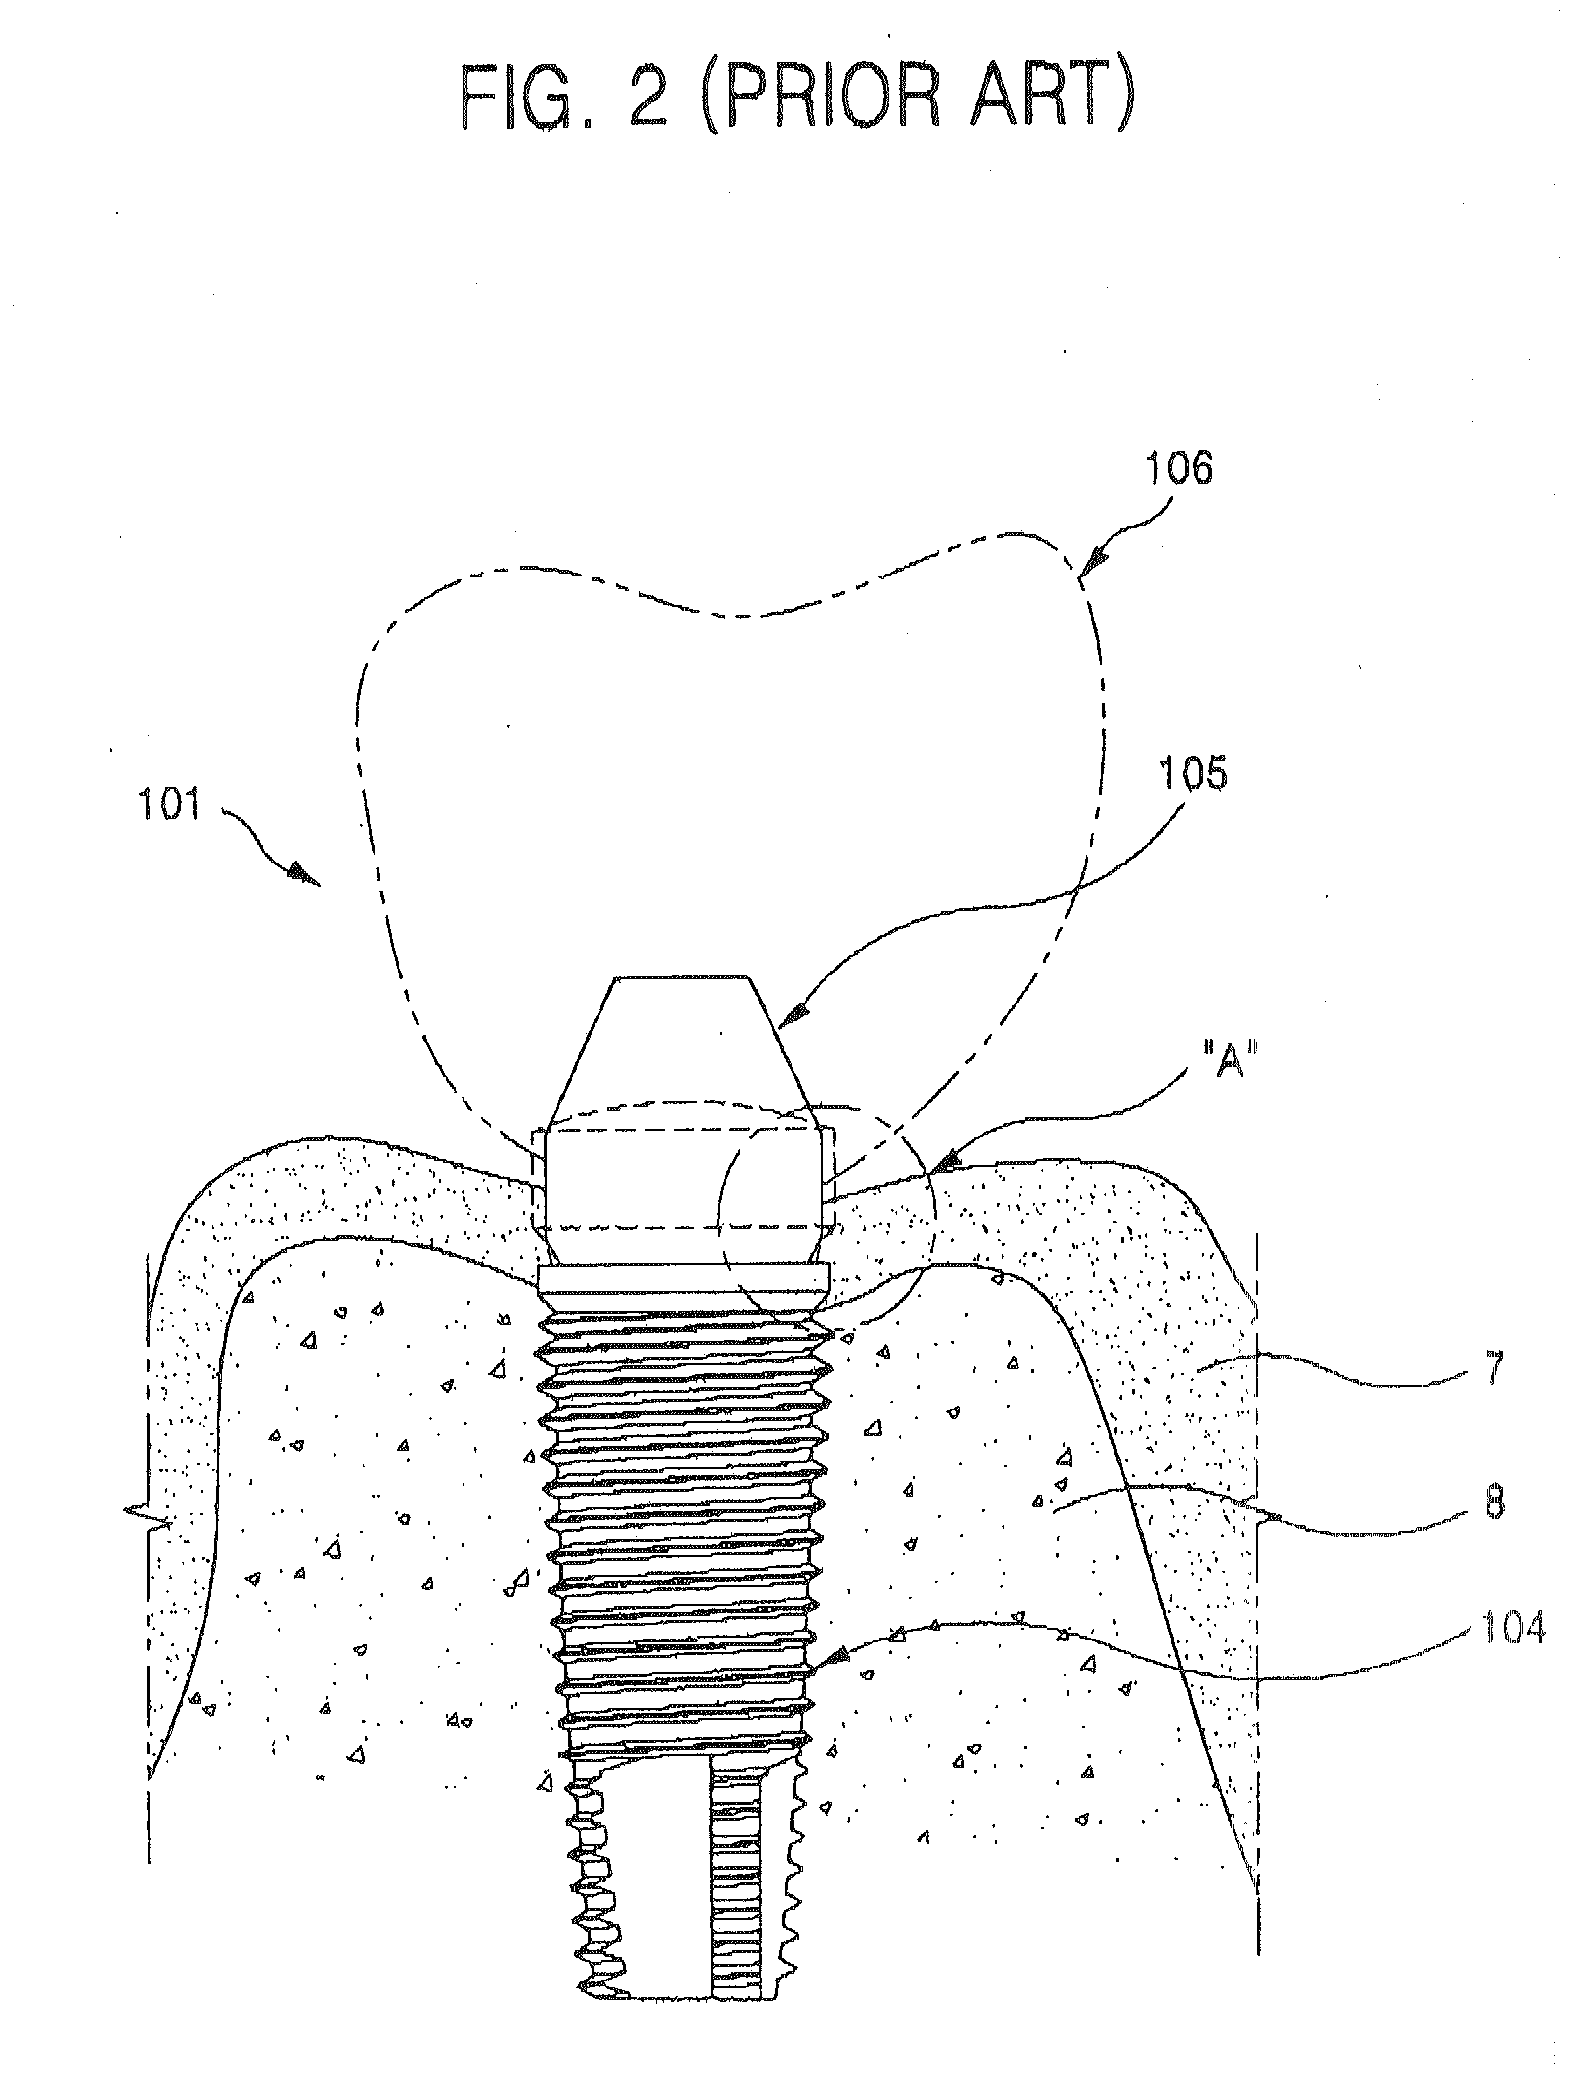 Healing Abutment and Dental Implant Having the Same